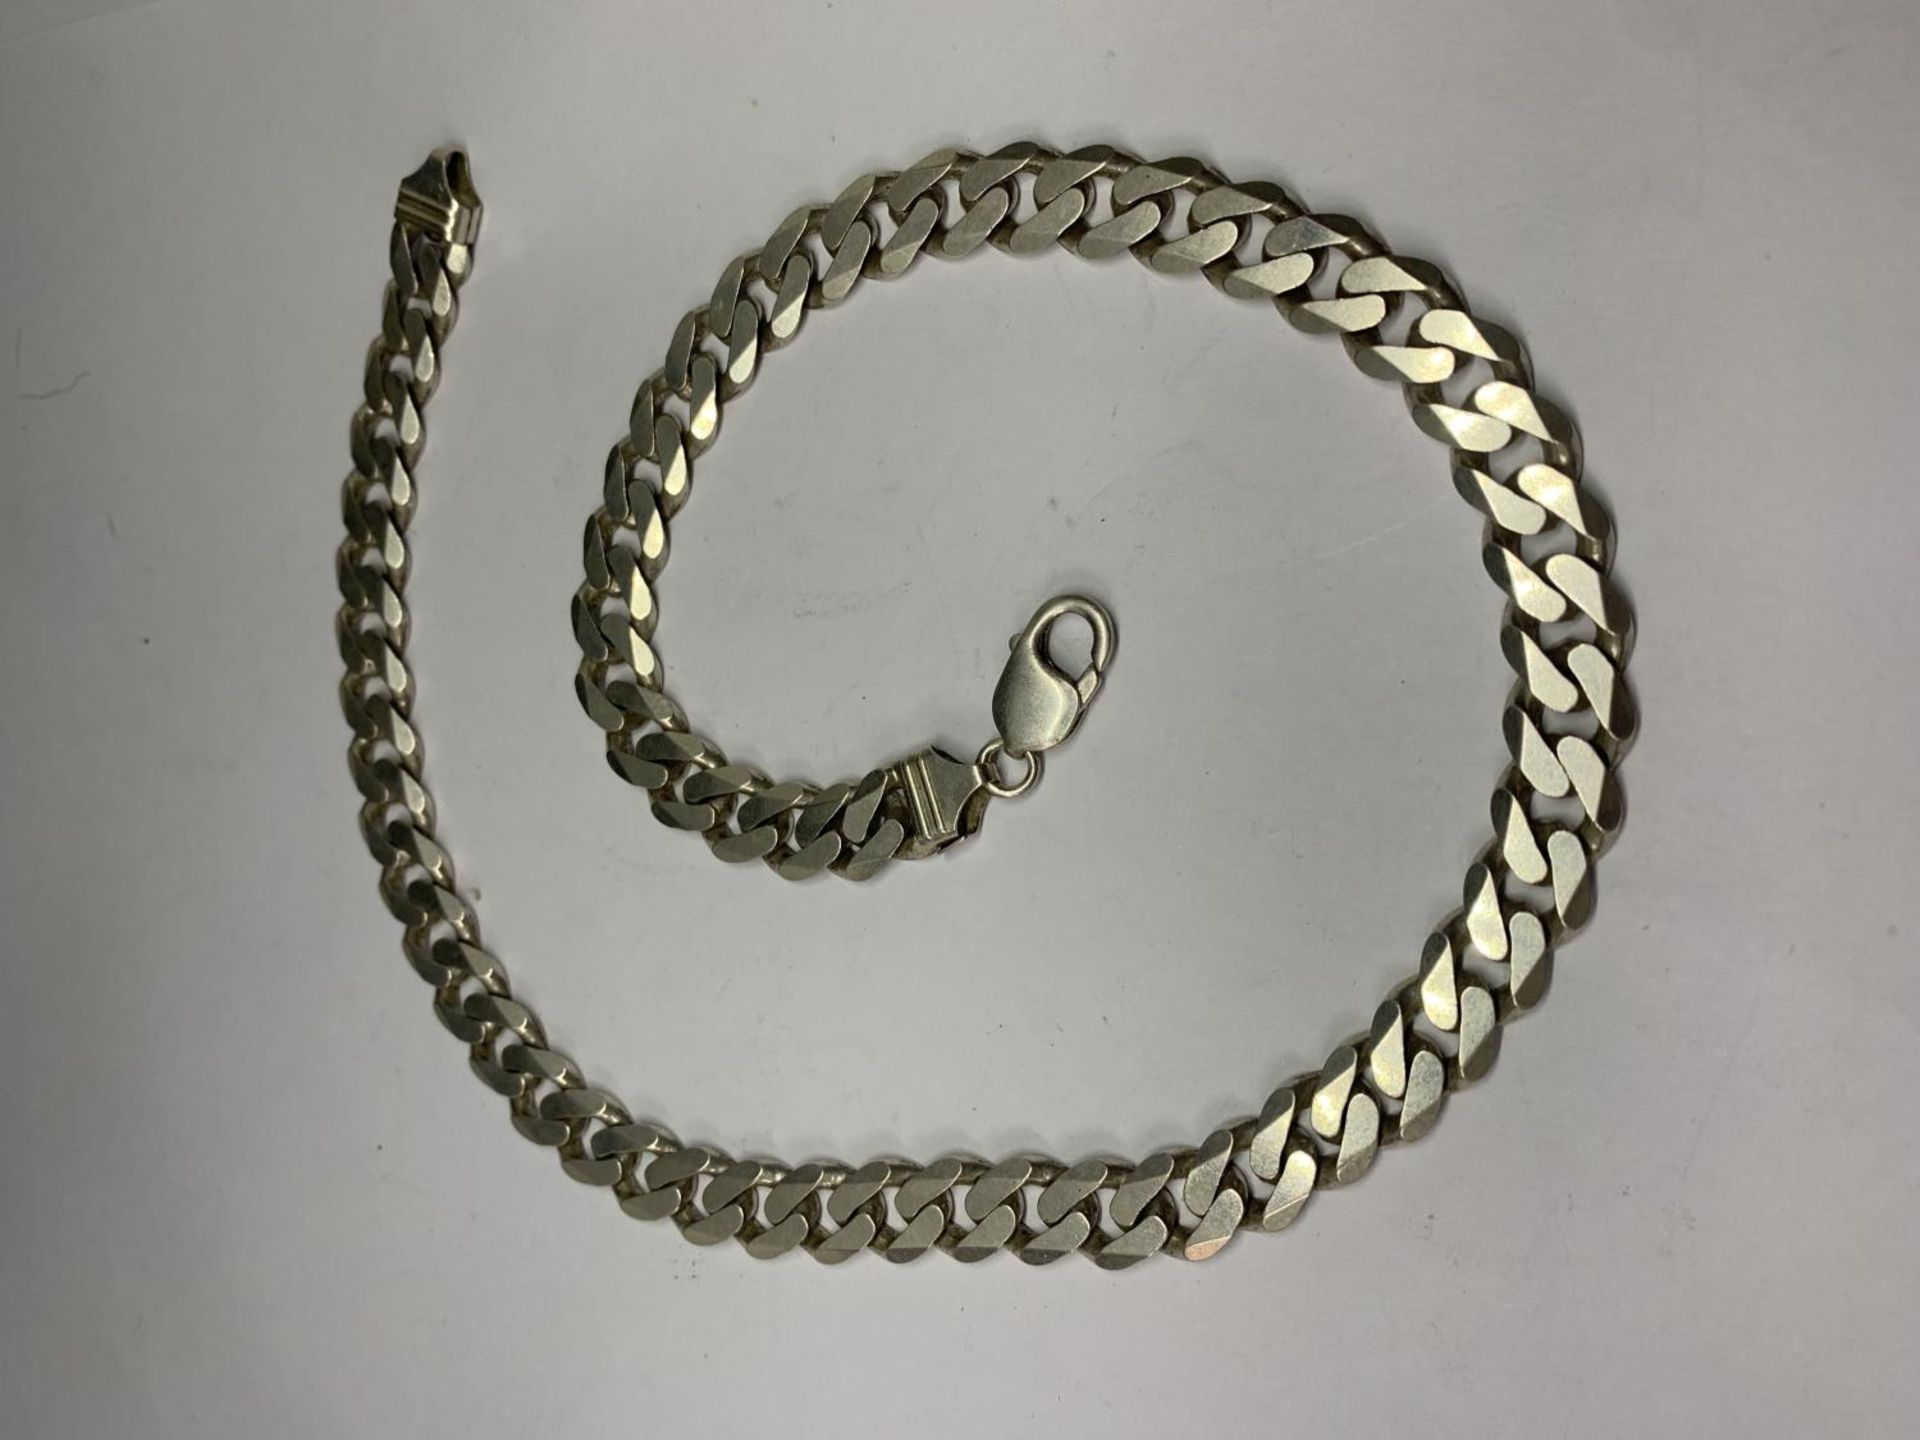 A HEAVY MARKED SILVER FLAT LINK NECKLACE LENGTH 51 CM WEIGHT 85.5 GRAMS